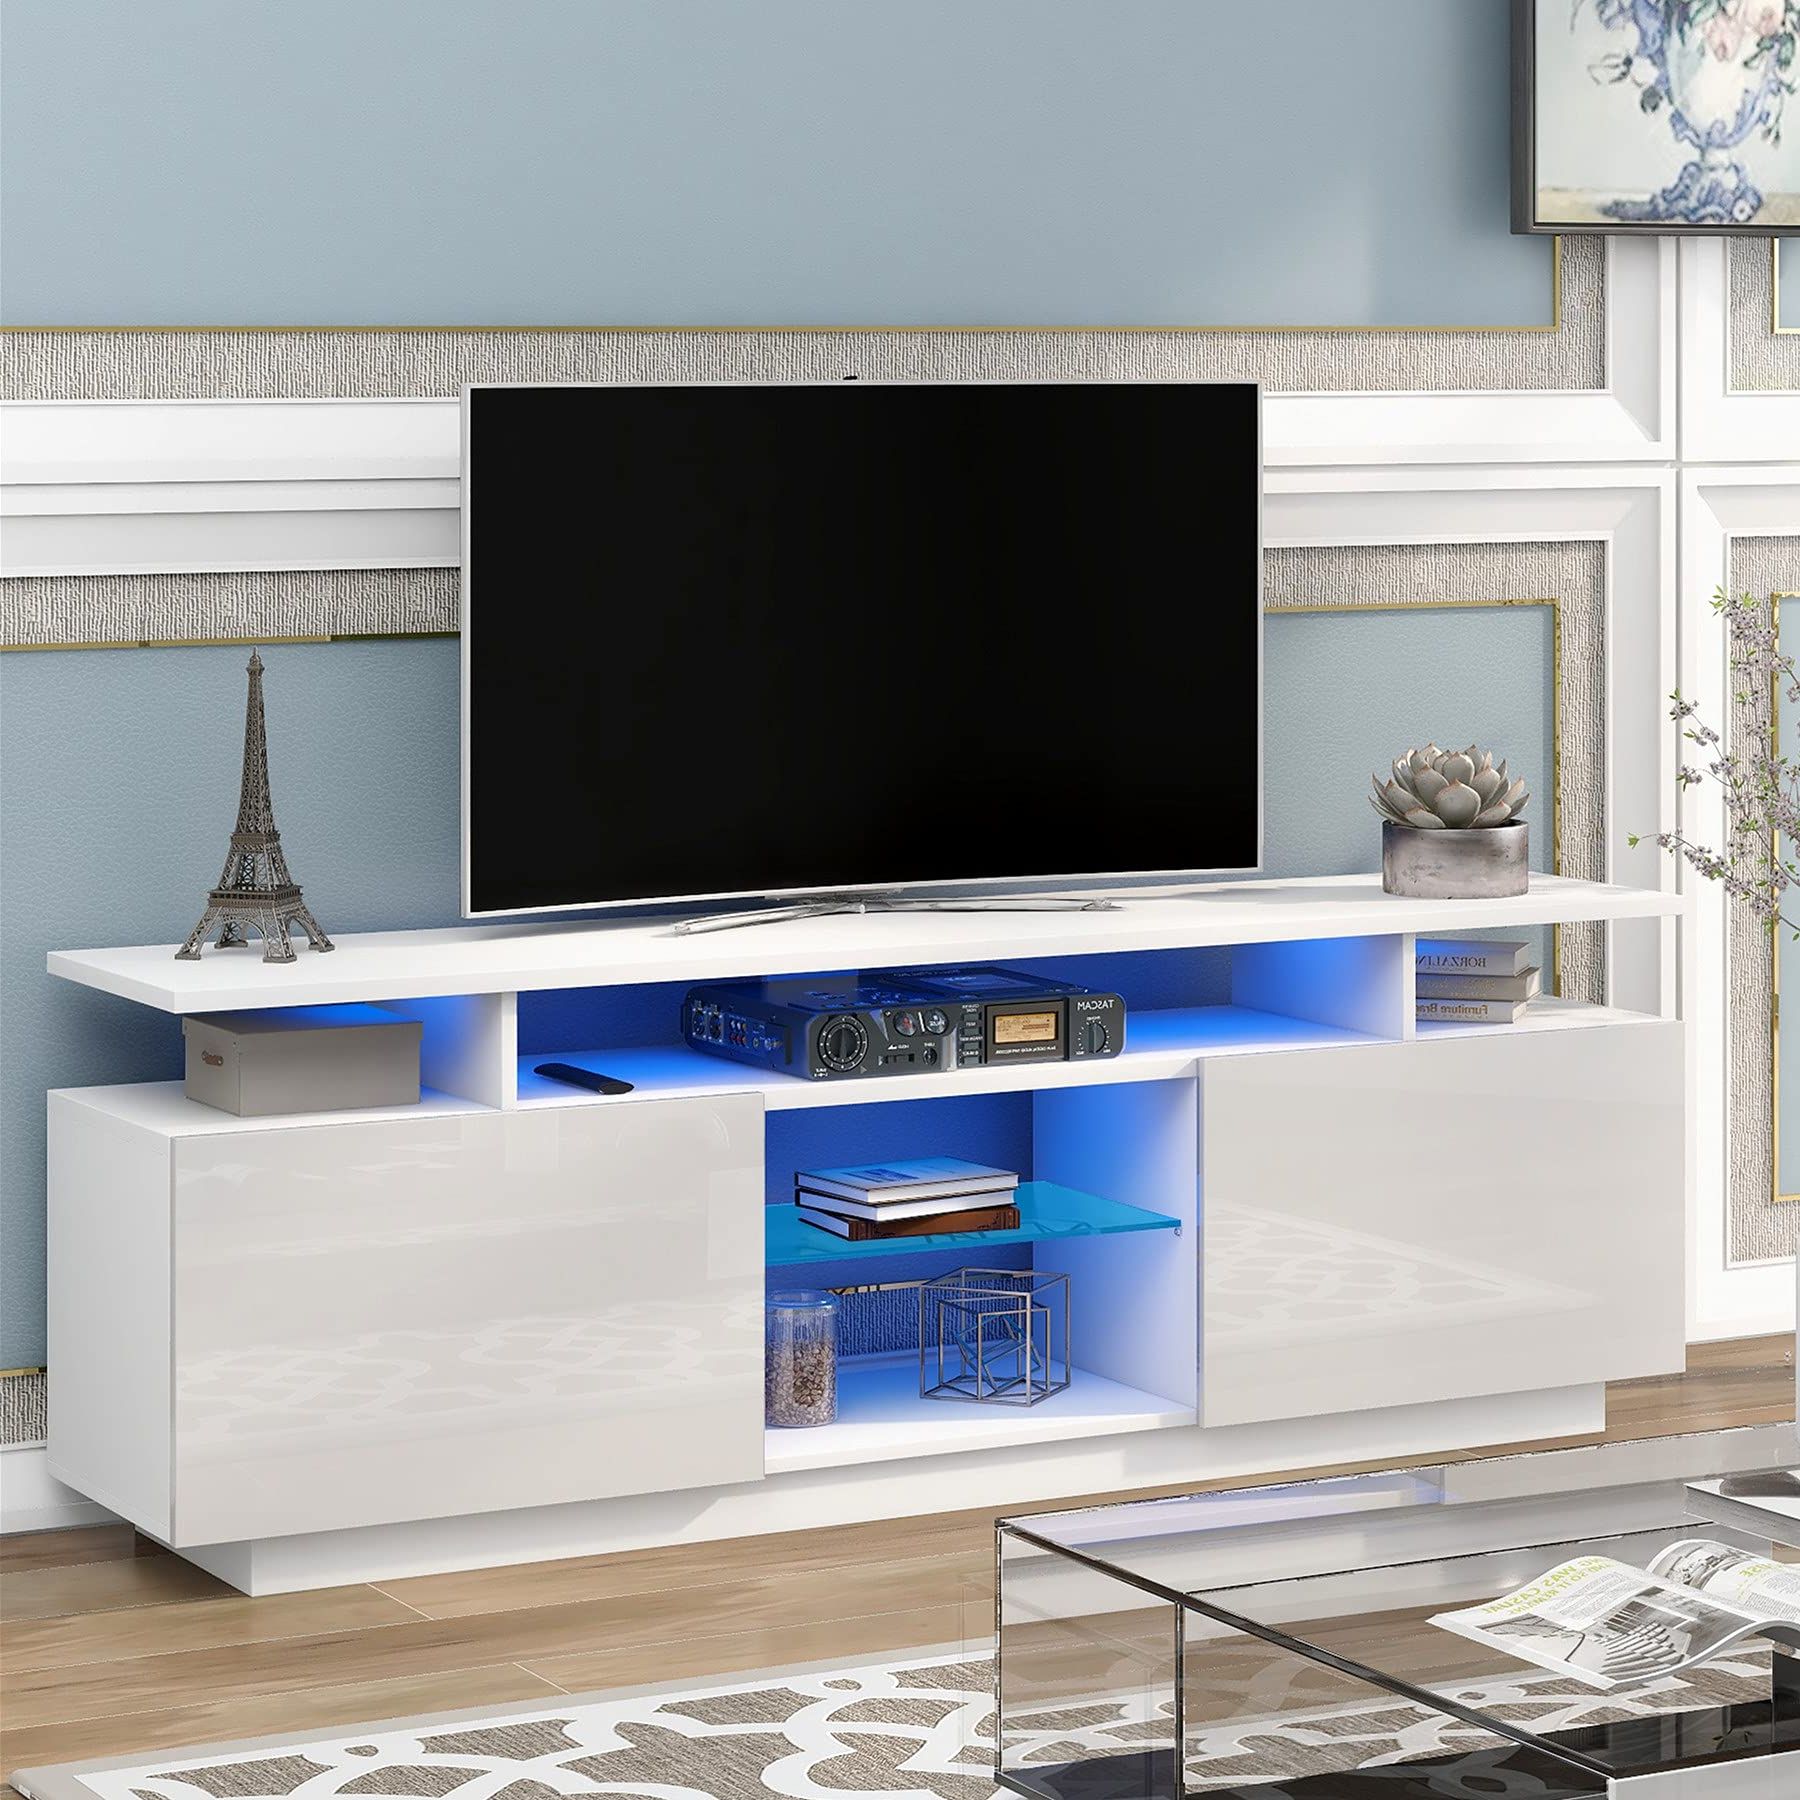 Rgb Tv Entertainment Centers Regarding Best And Newest Buy Ssline Modern White Tv Stand With Rgb Led Light Wood Television (View 7 of 15)